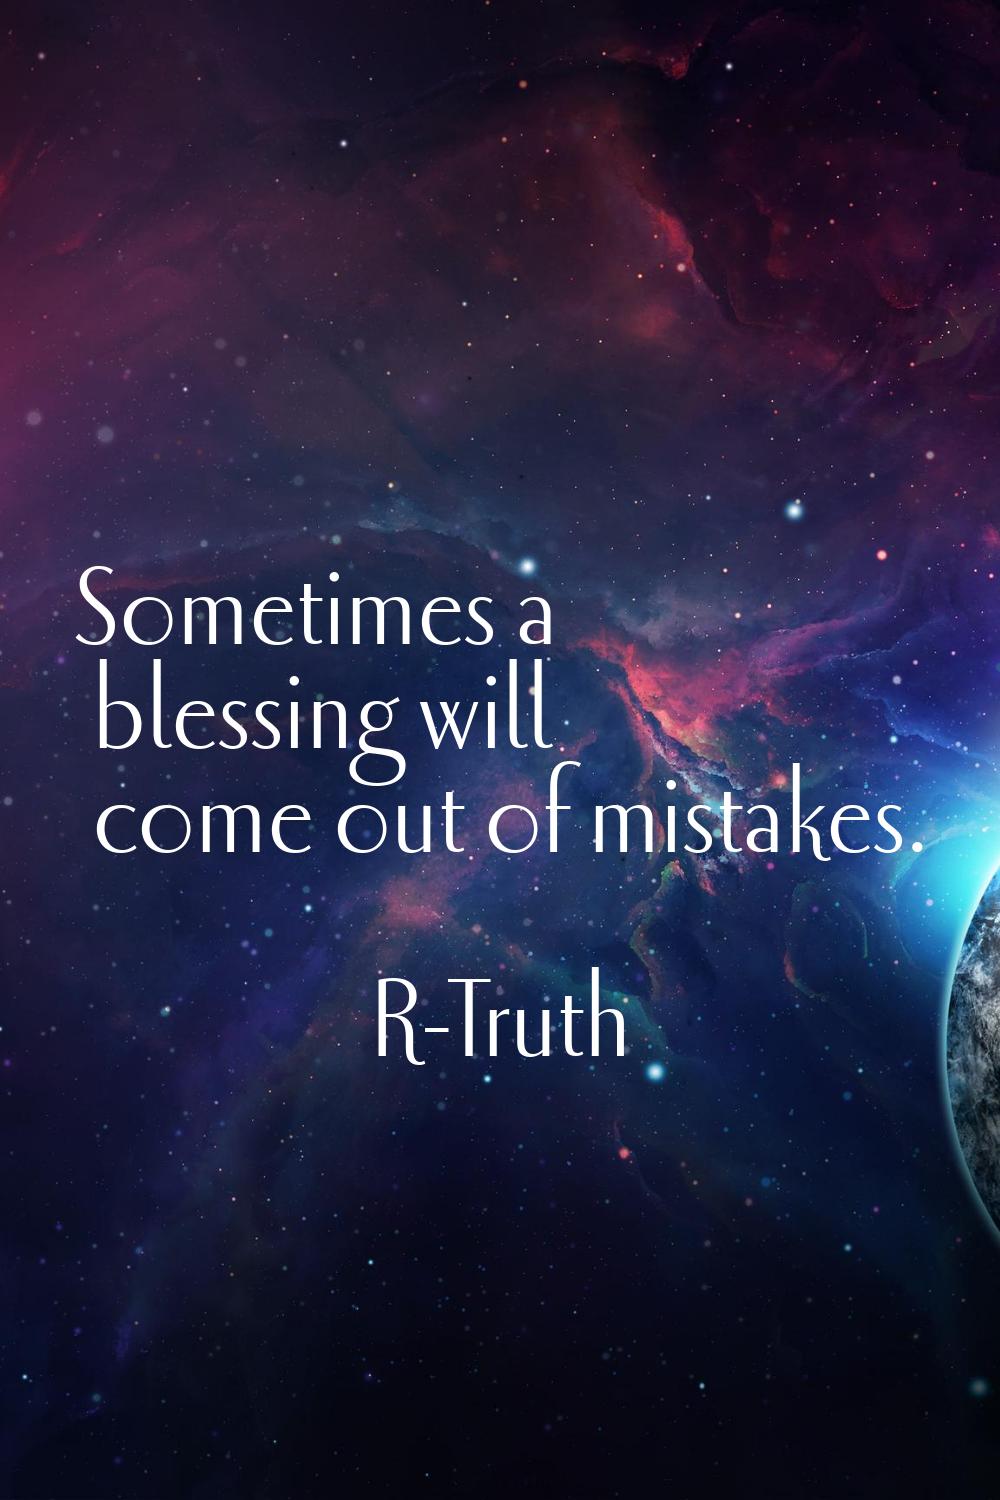 Sometimes a blessing will come out of mistakes.